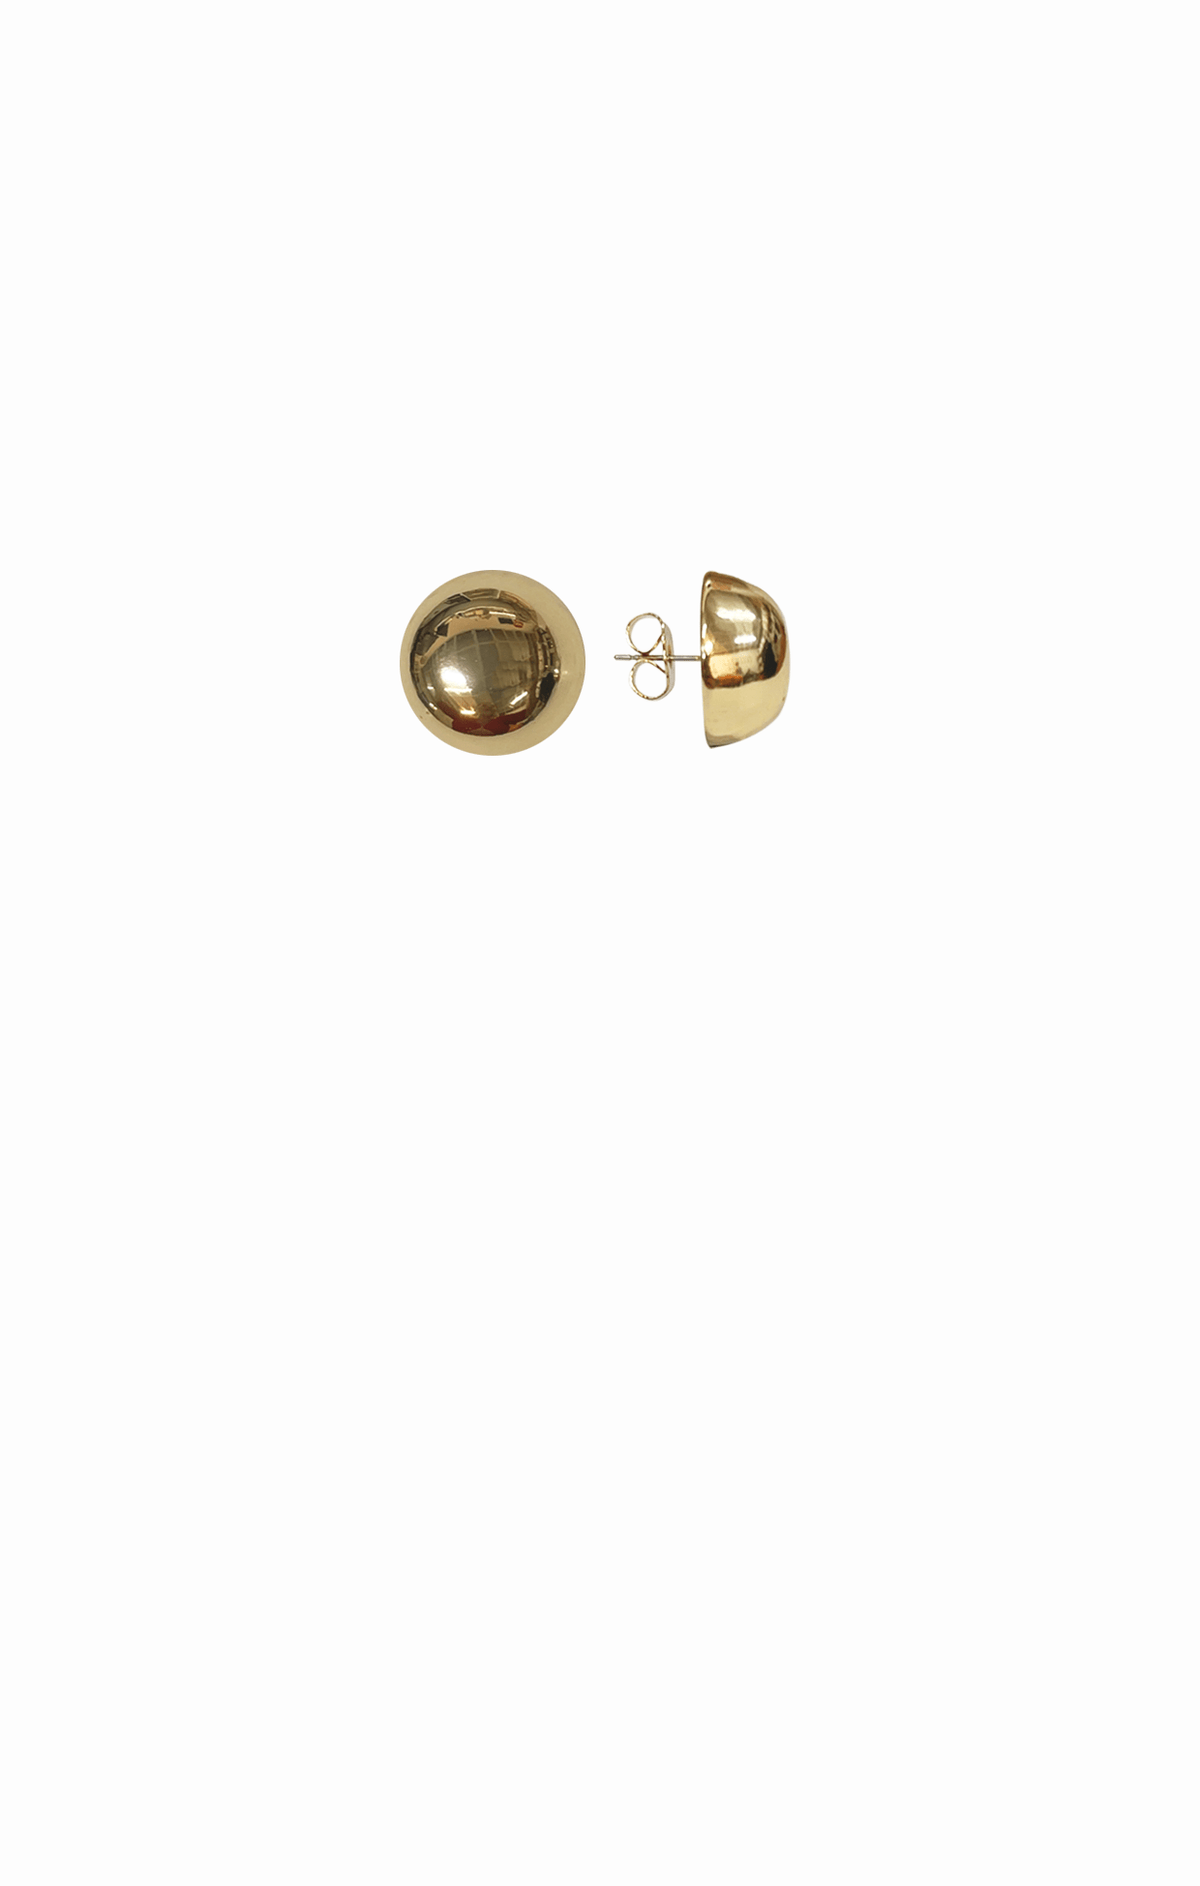 Earrings OS / GOLD POLISHED DOME STUD EARRING IN GOLD